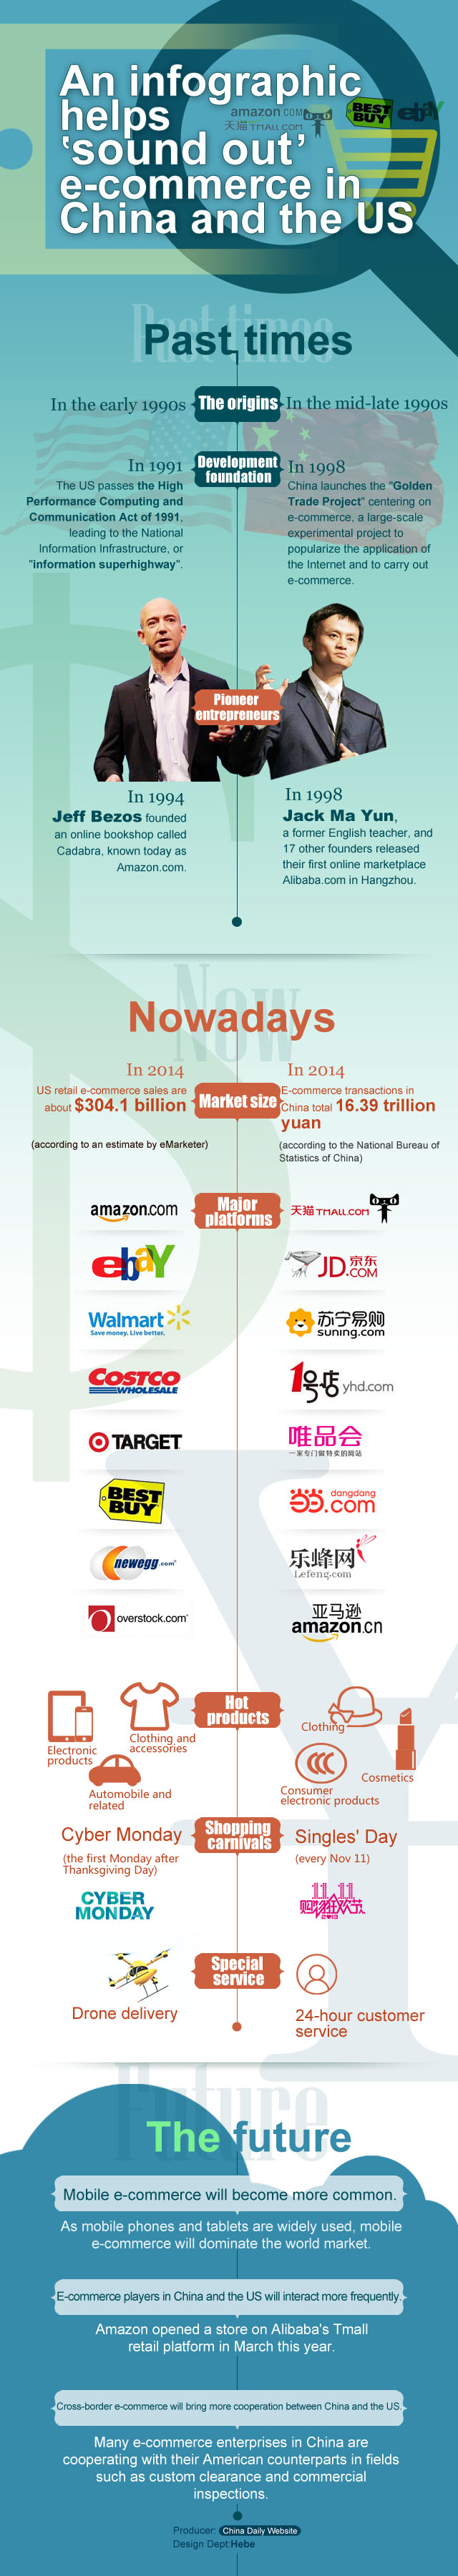 An infographic helps 'sound out' e-commerce in China and the US